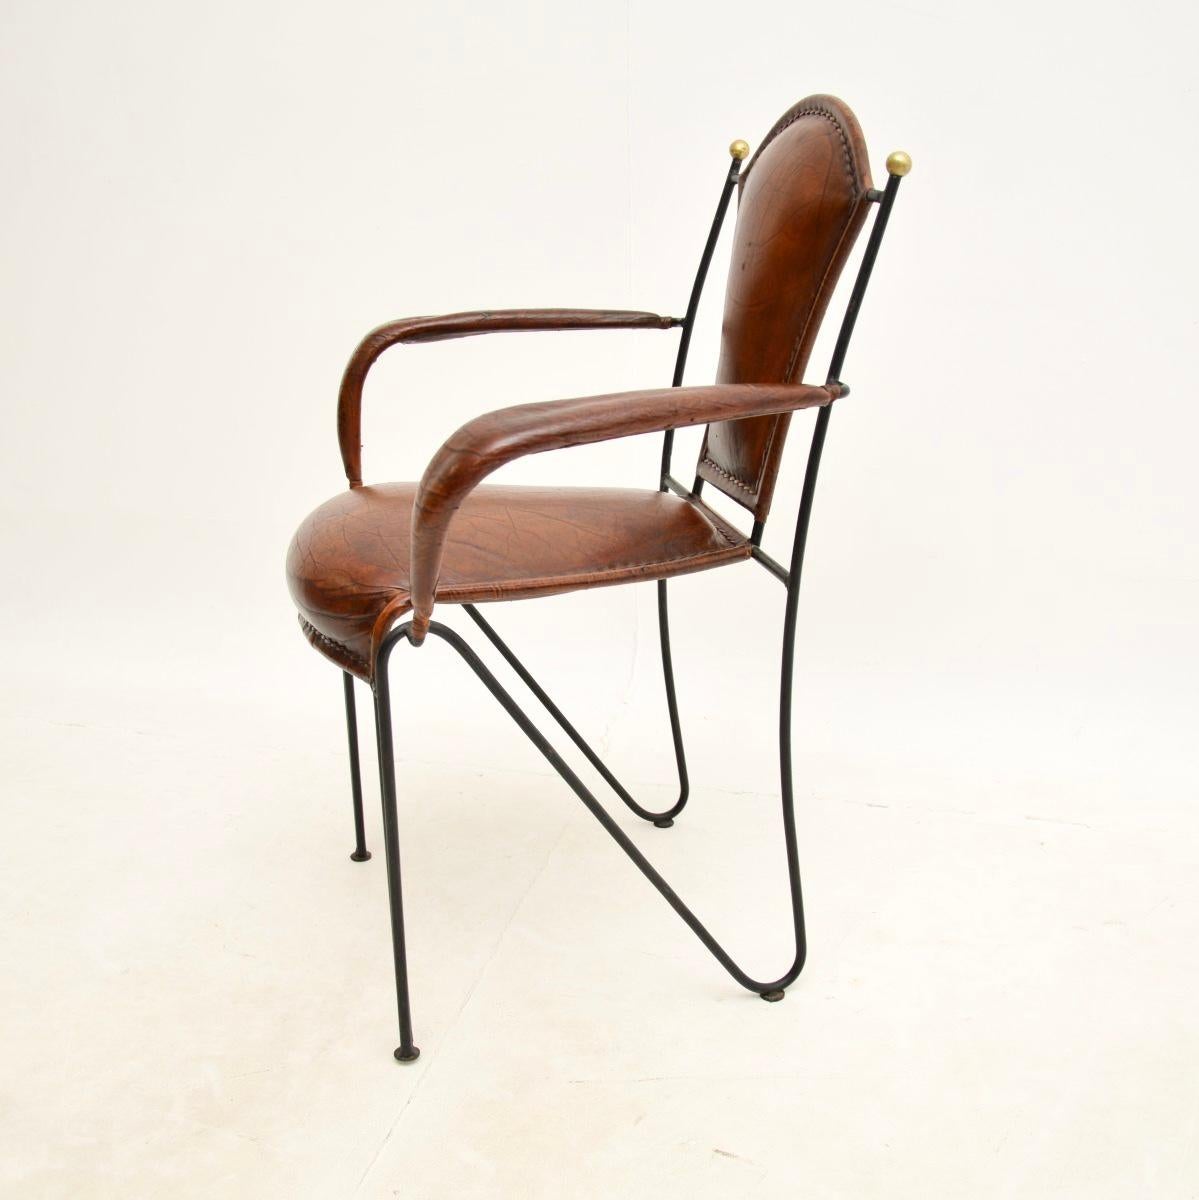 Mid-20th Century Vintage French Iron and Leather Armchair For Sale